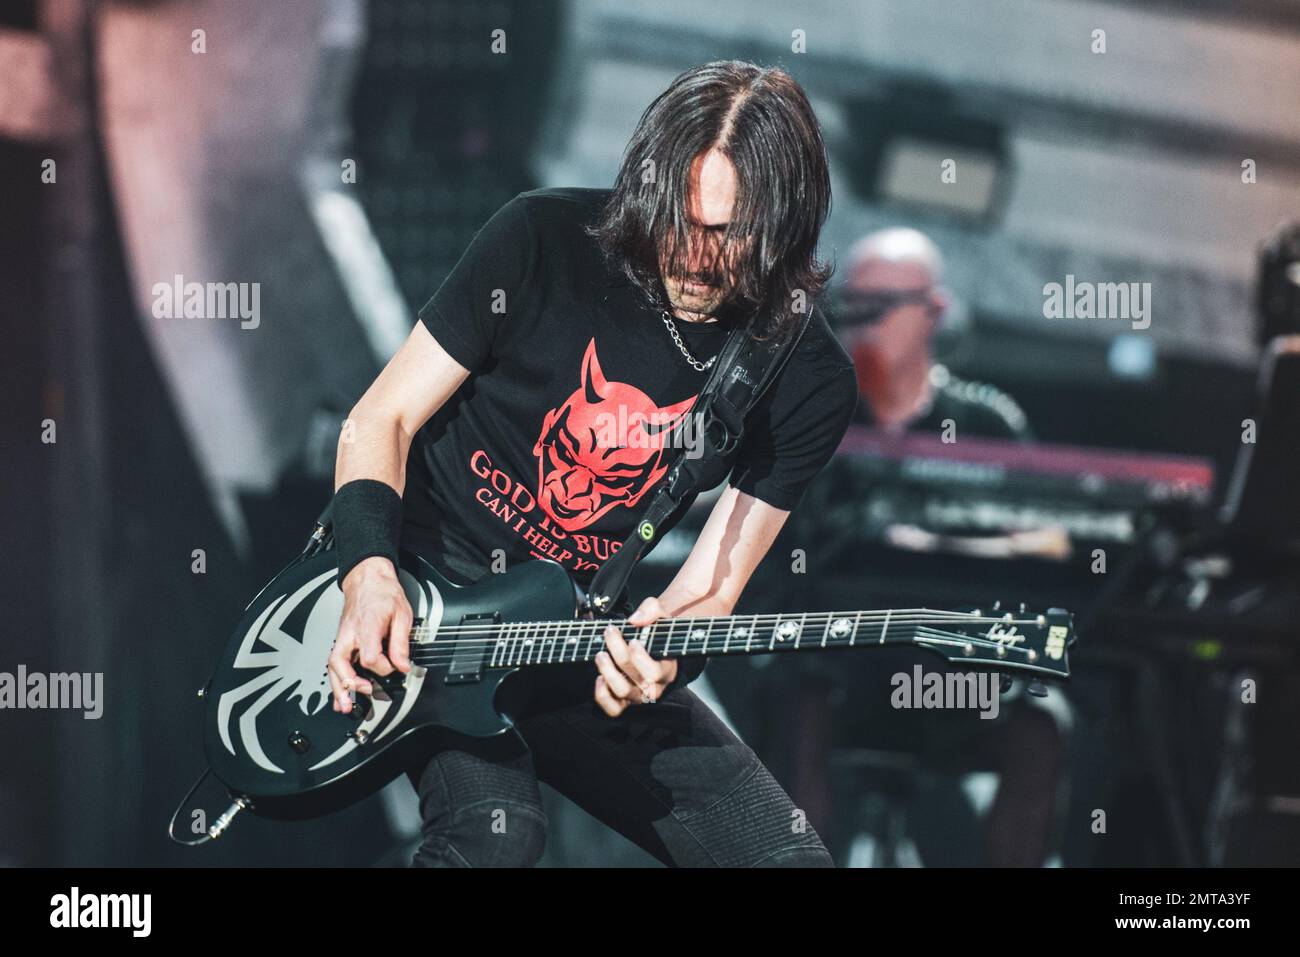 STADIO OLIMPICO, TURIN, ITALY: Vince Pastano, guitarist of the Italian rocker Vasco Rossi, performing live on stage for the “LIVE KOM” tour Stock Photo